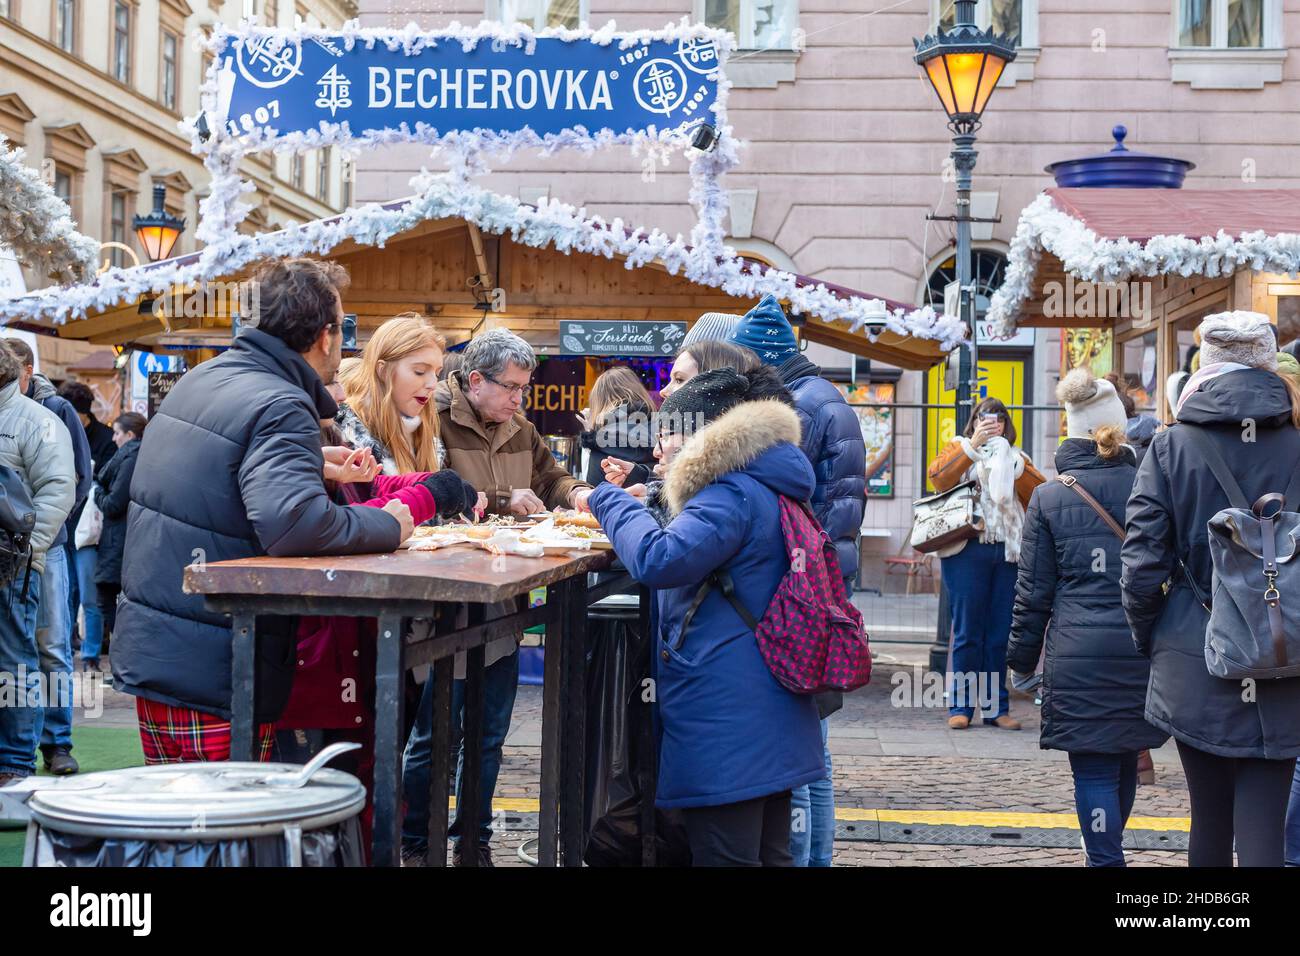 Budapest, Hungary - December 31, 2018: People eating fast food at Christmas market in Budapest, Hungary Stock Photo